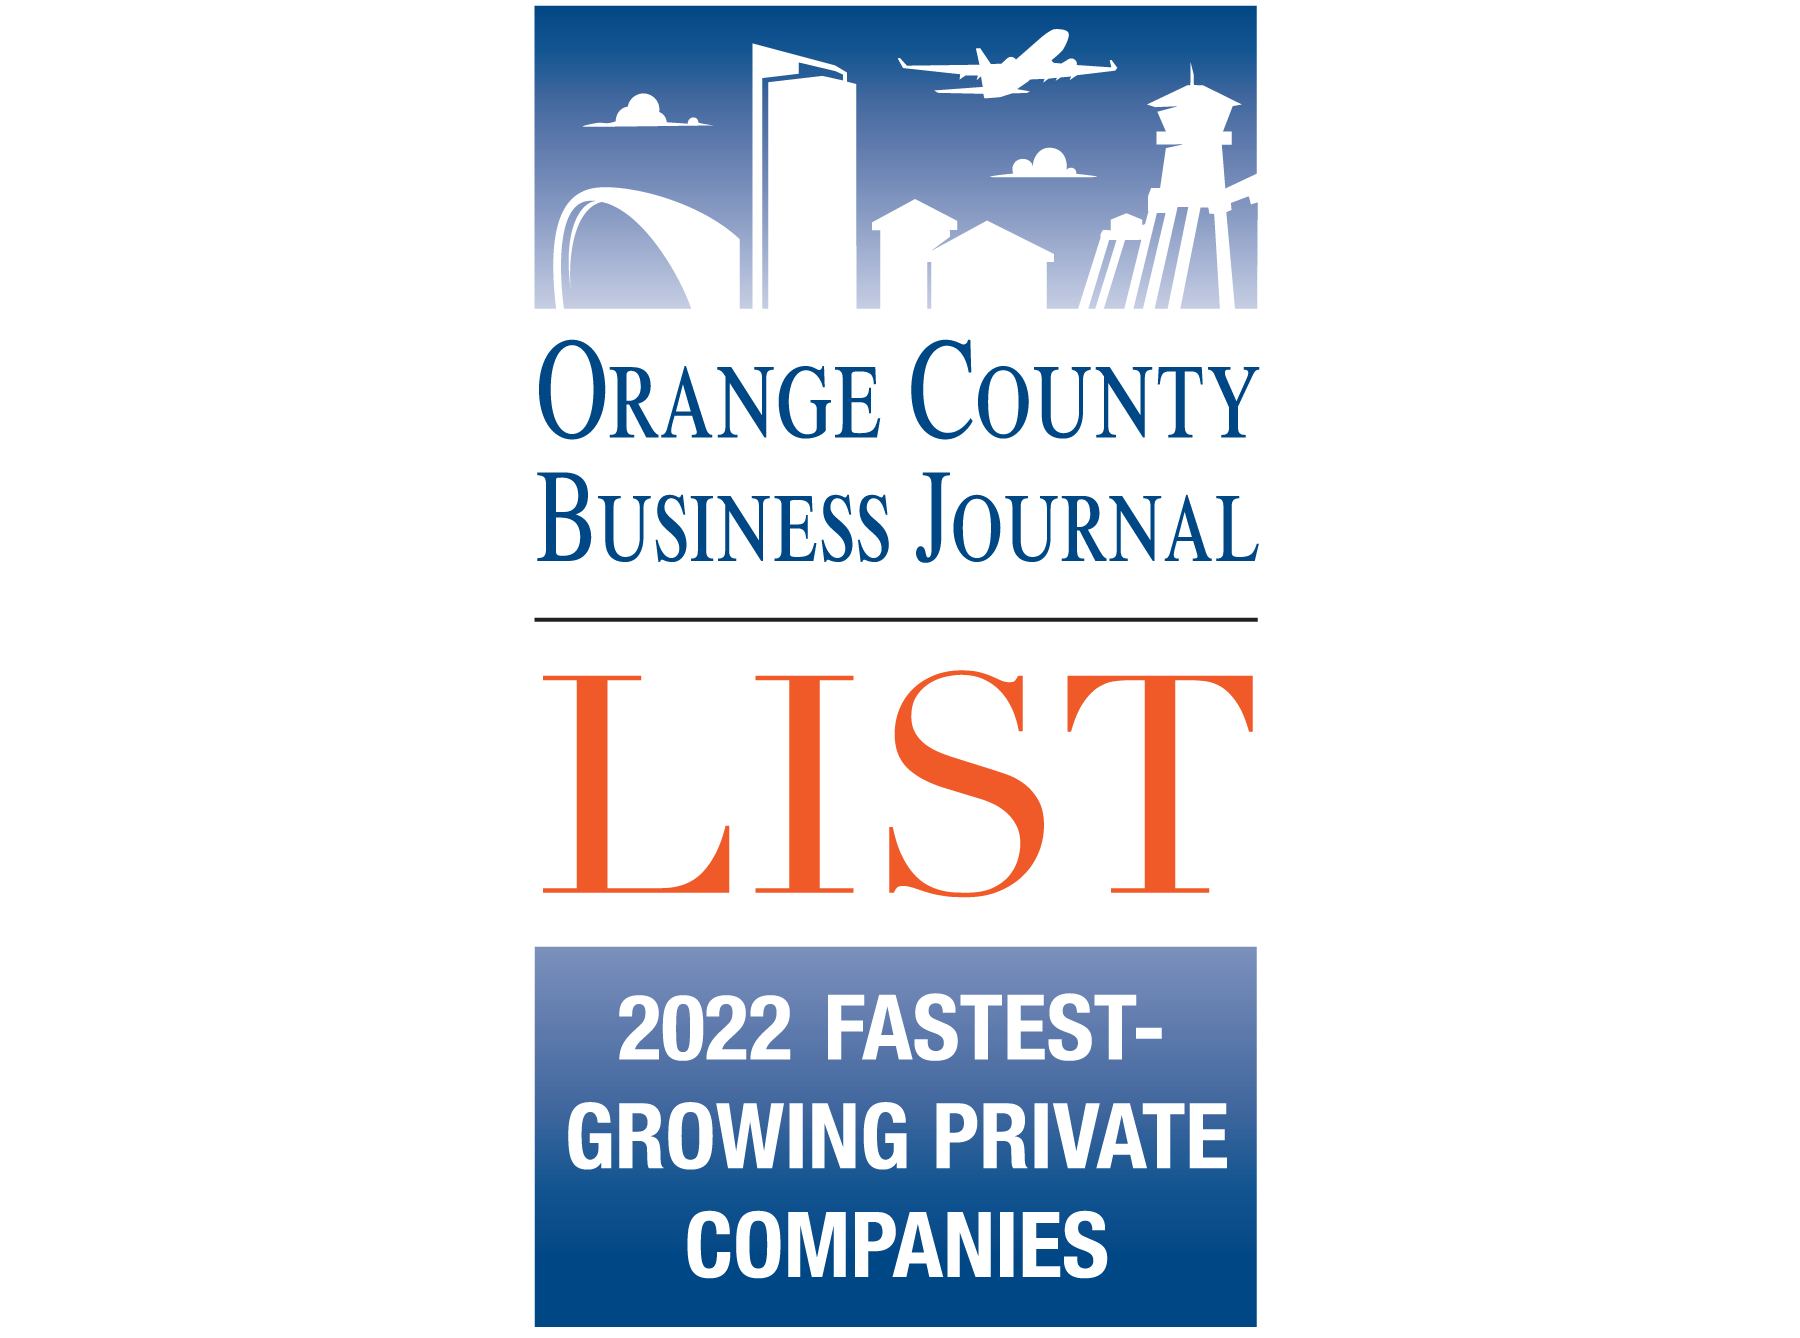 List_Icon_2022-Fastest-Growing-Private-Companies 1800x1338